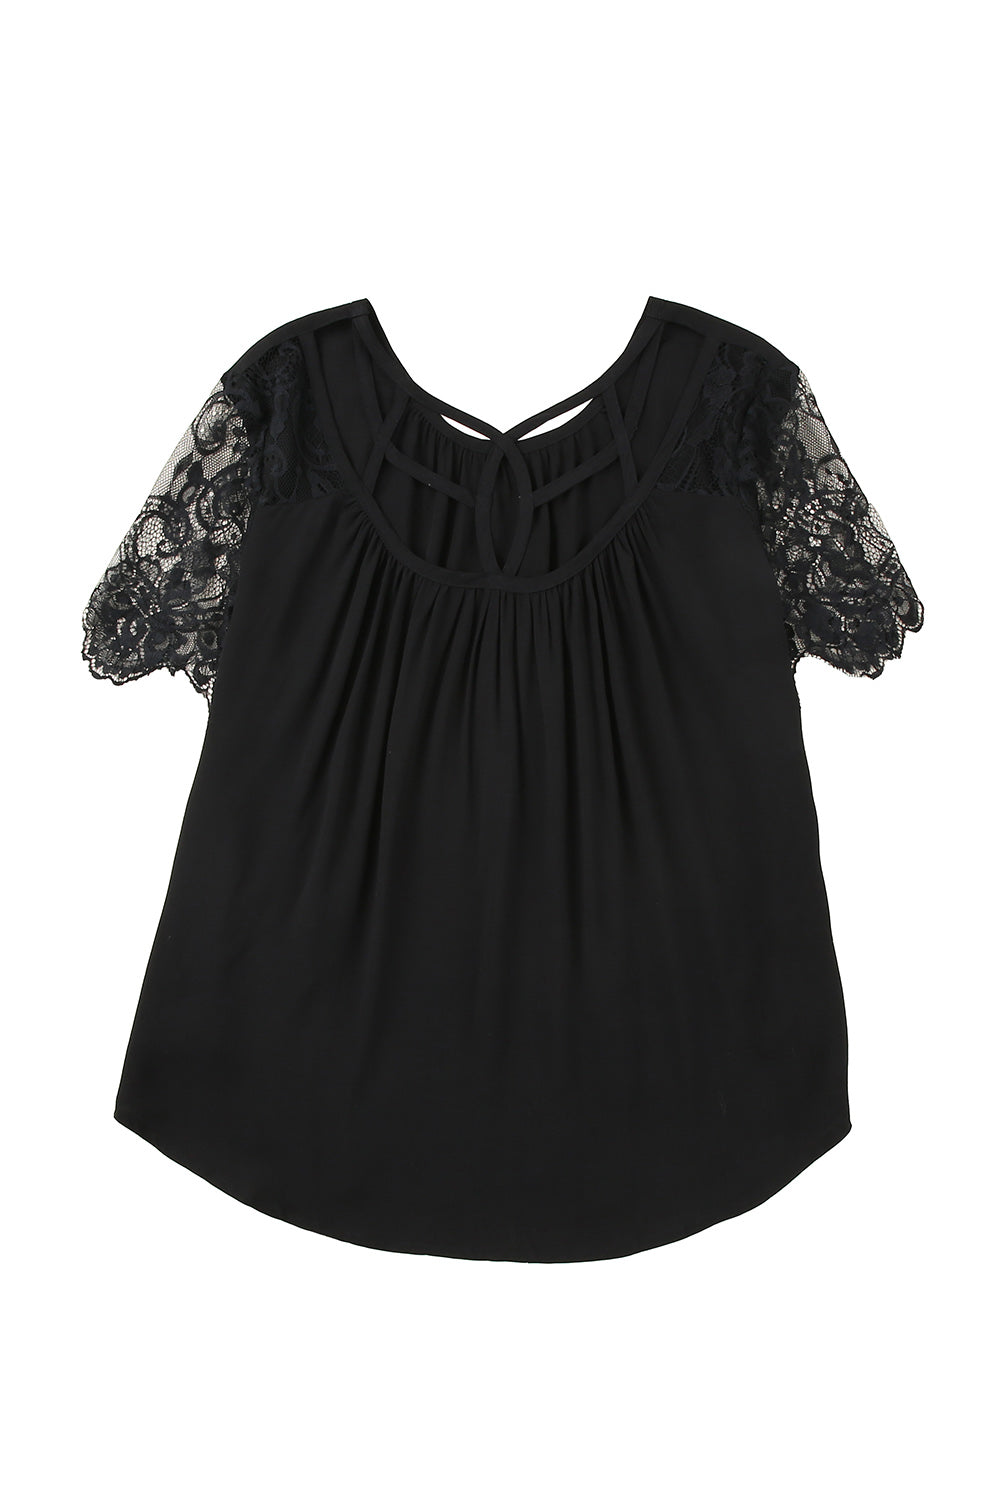 Black Cut Out Lace Patchwork Short Sleeve Top